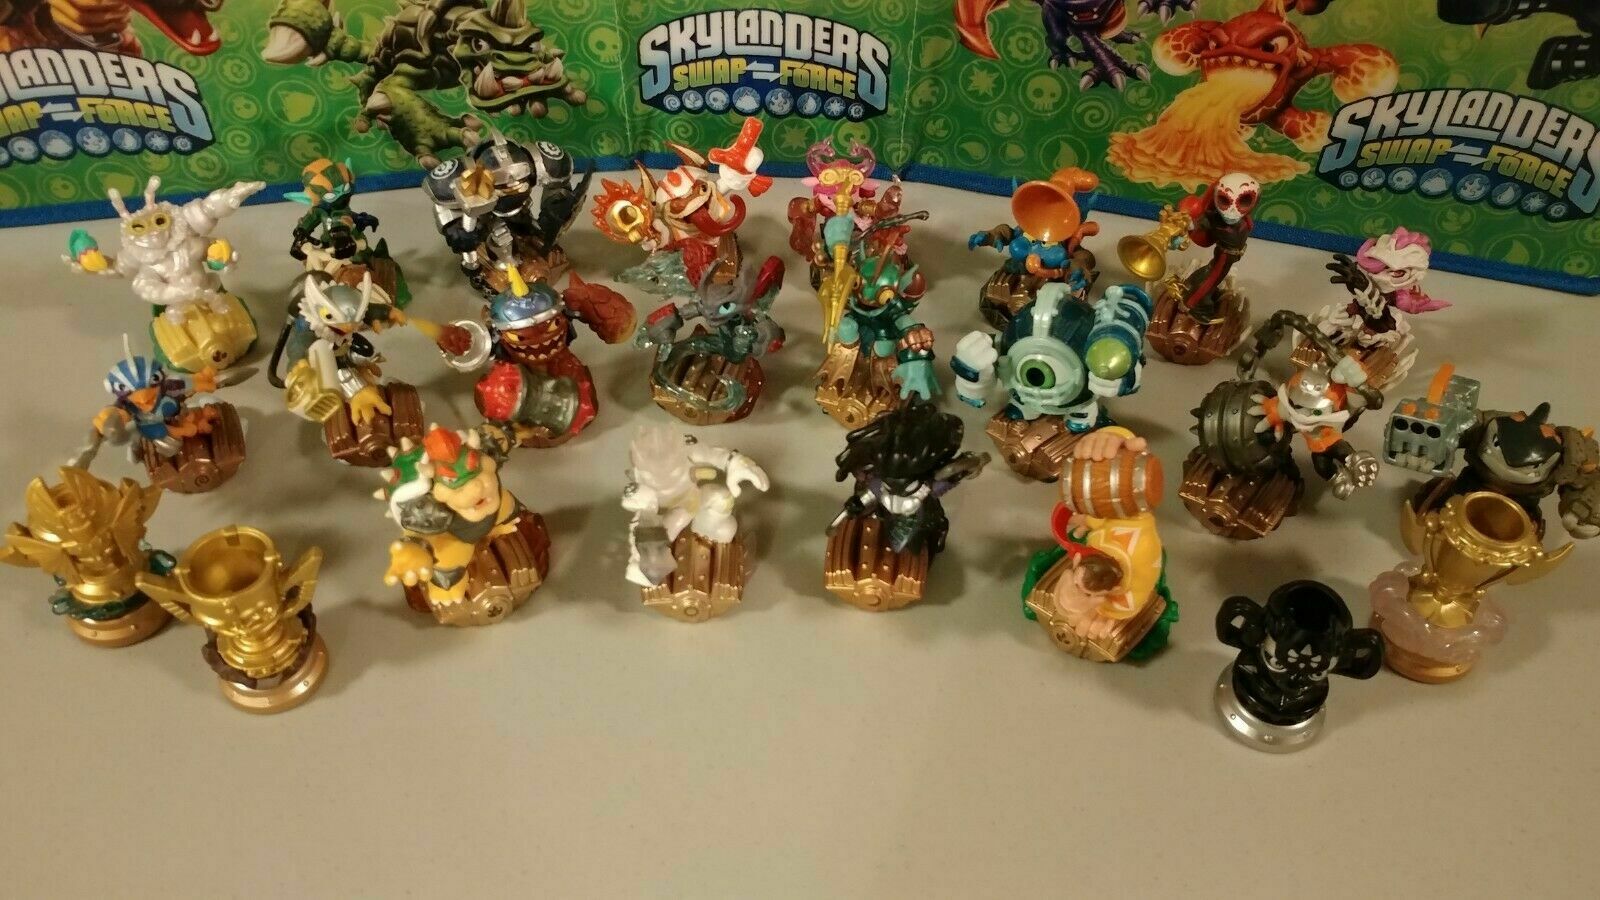 Skylanders Superchargers Complete Your Collection Buy 3 Get 1 Free $6 Minimum 🎼